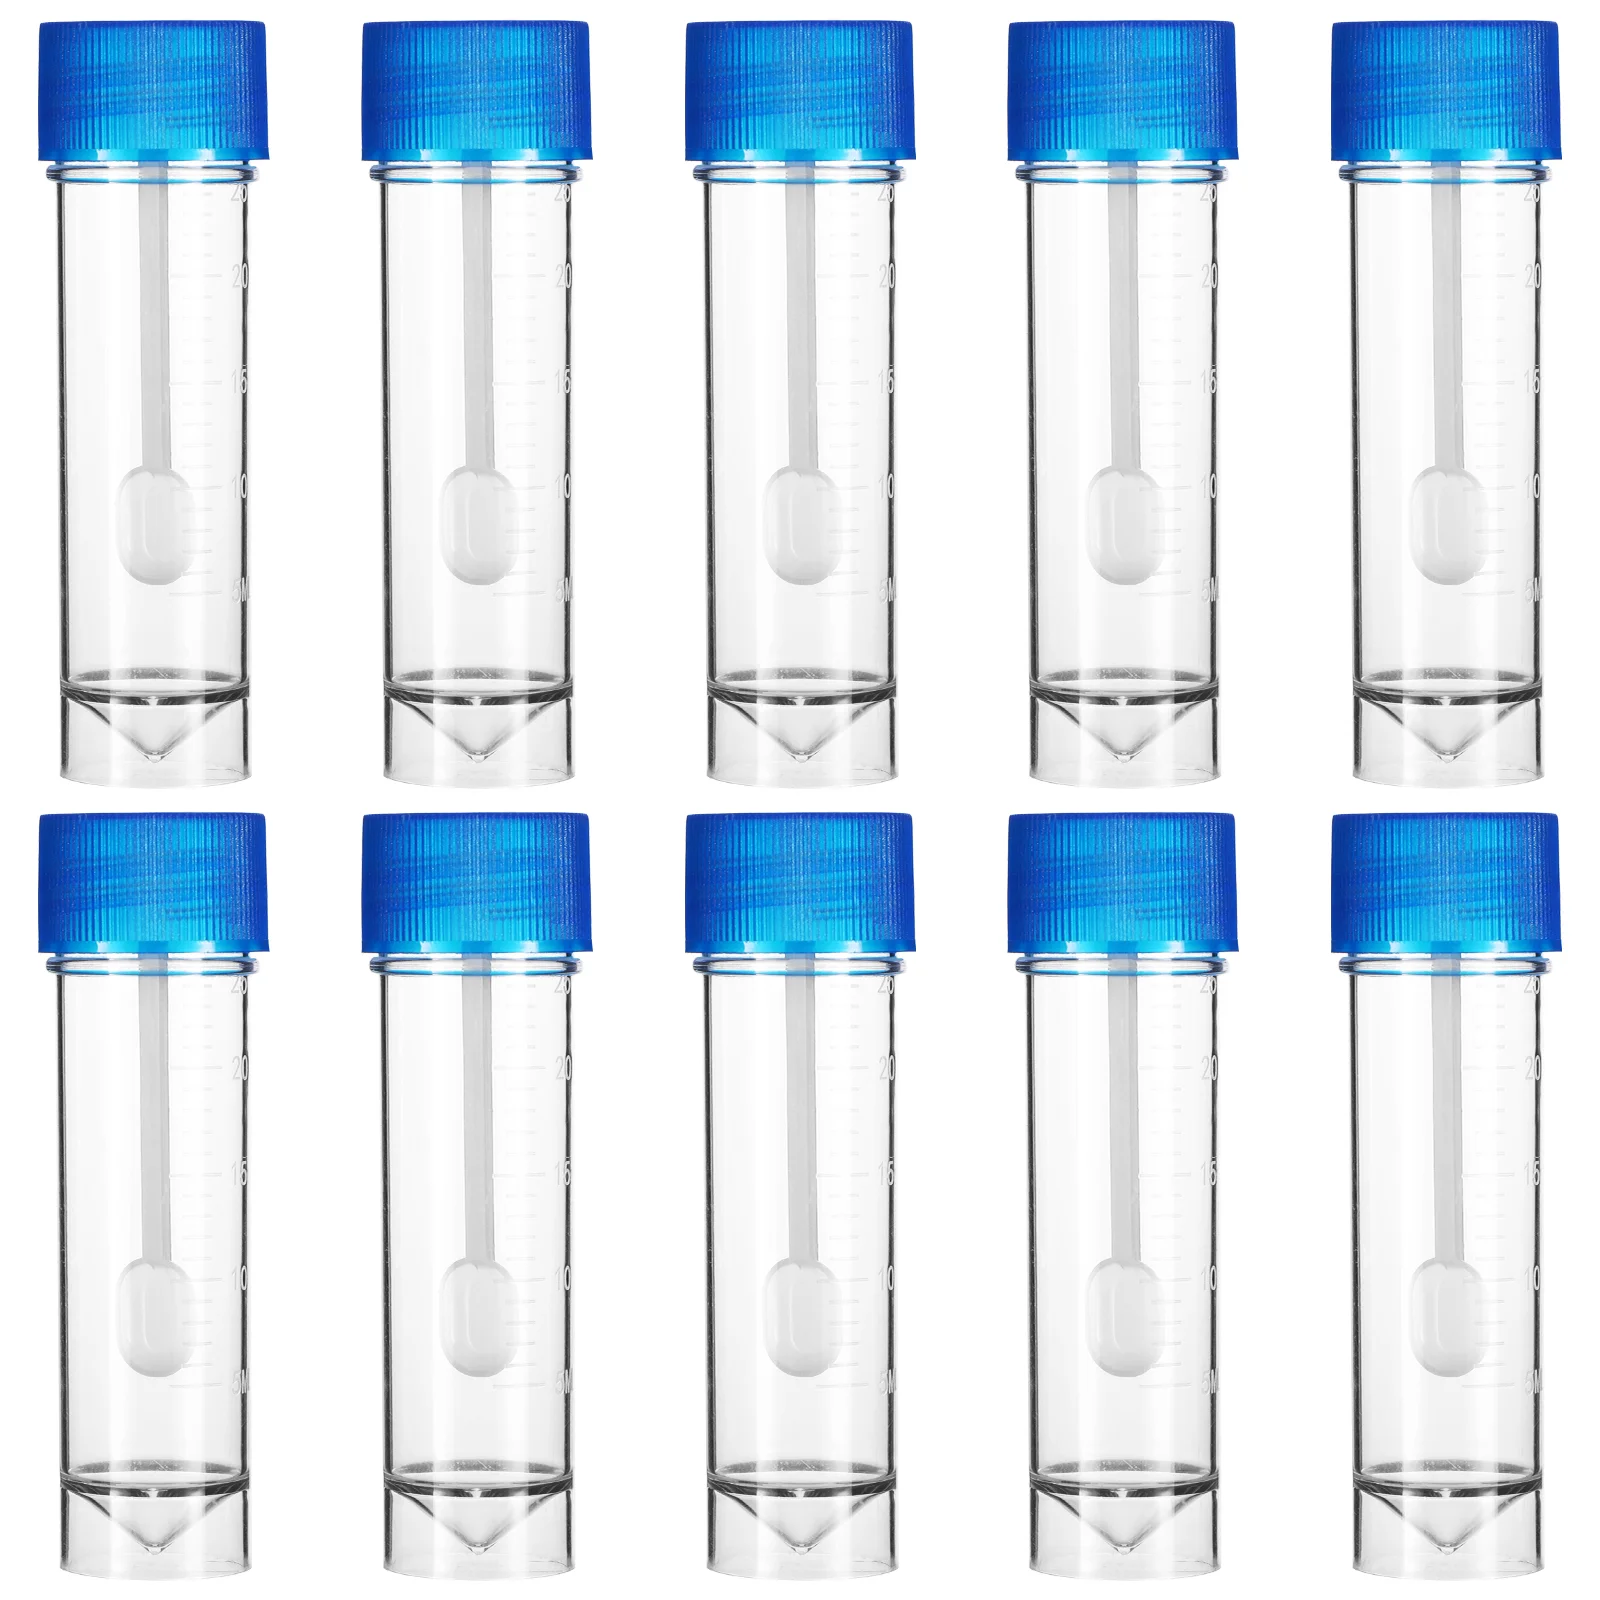 

10pcs Plastic Specimen Cups Disposable Stool Sample Collection Cups Specimen Cups for Testing (25-30ML) Urine container